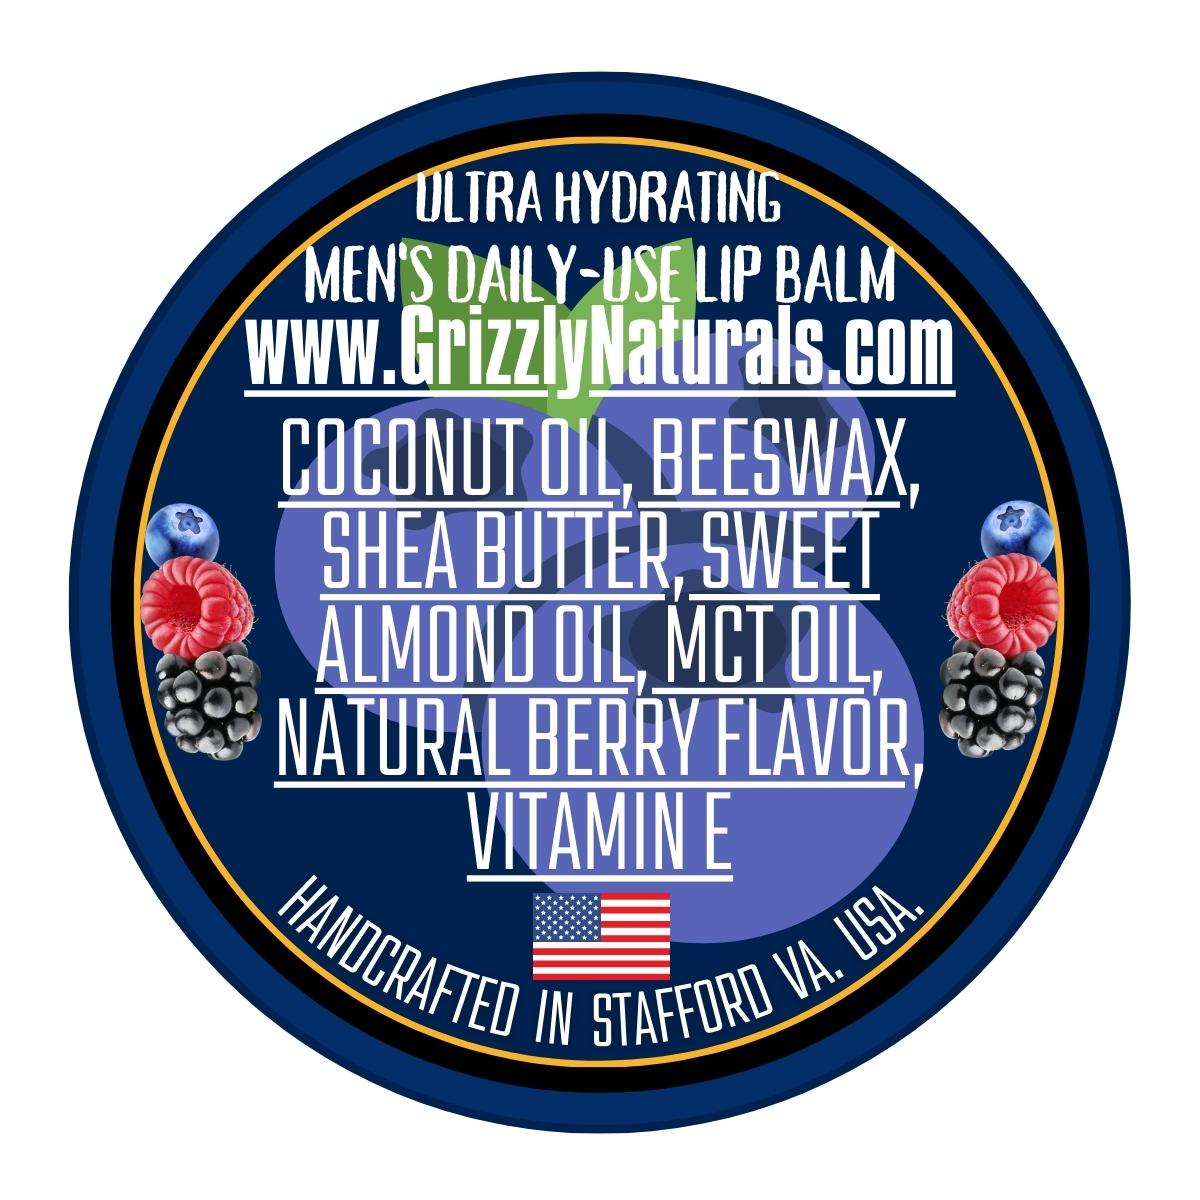 Wild Bearry - Beeswax Lip Balm With Shea Butter, Almond Oil, Coconut Oil, Vitamin E, and Natural Flavor - Grizzly Naturals Soap Company